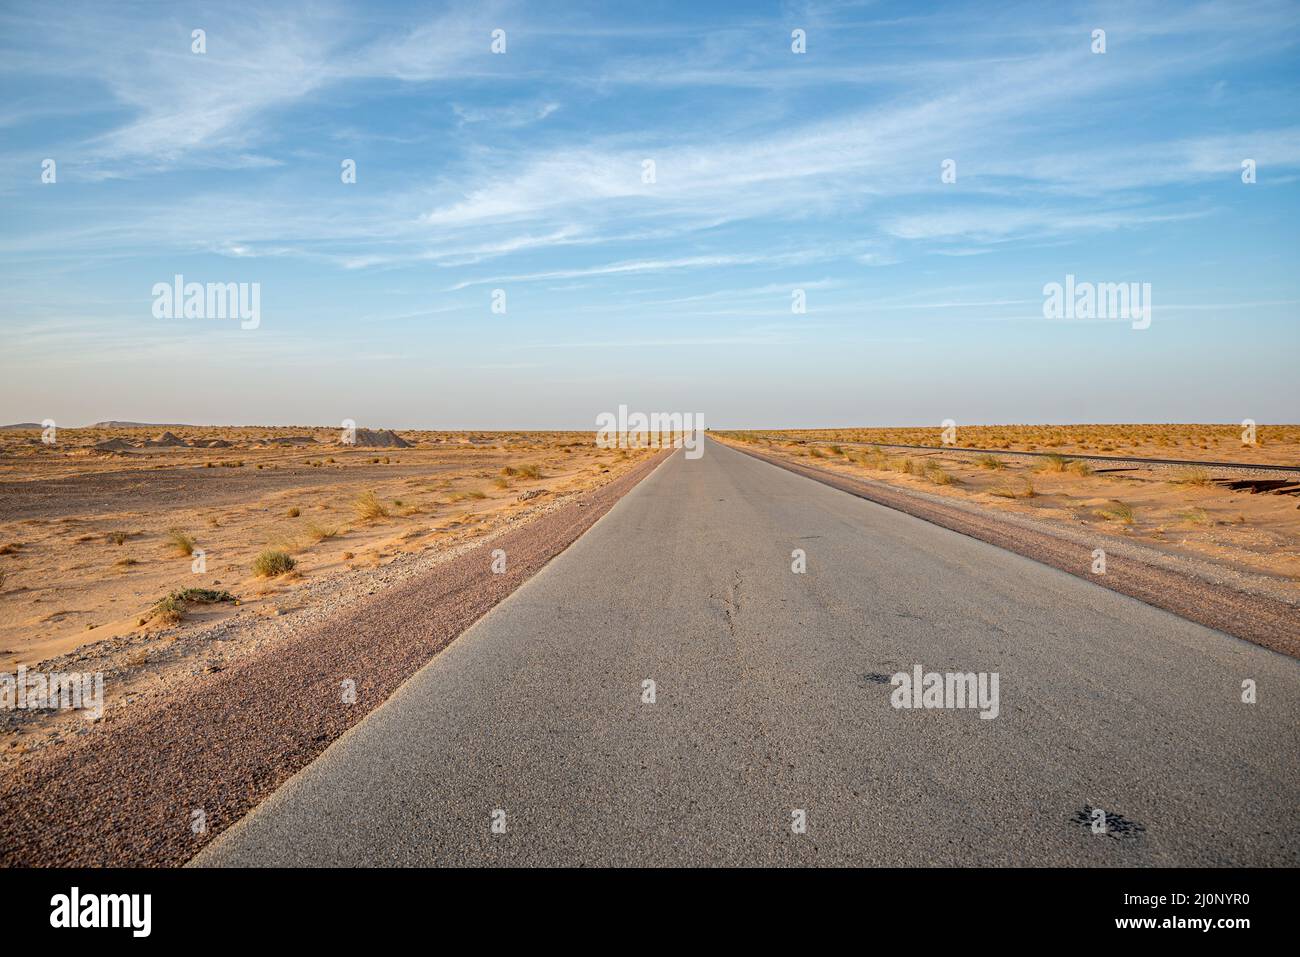 Paved road with no cars in the Sahara desert, Mauritania Stock Photo